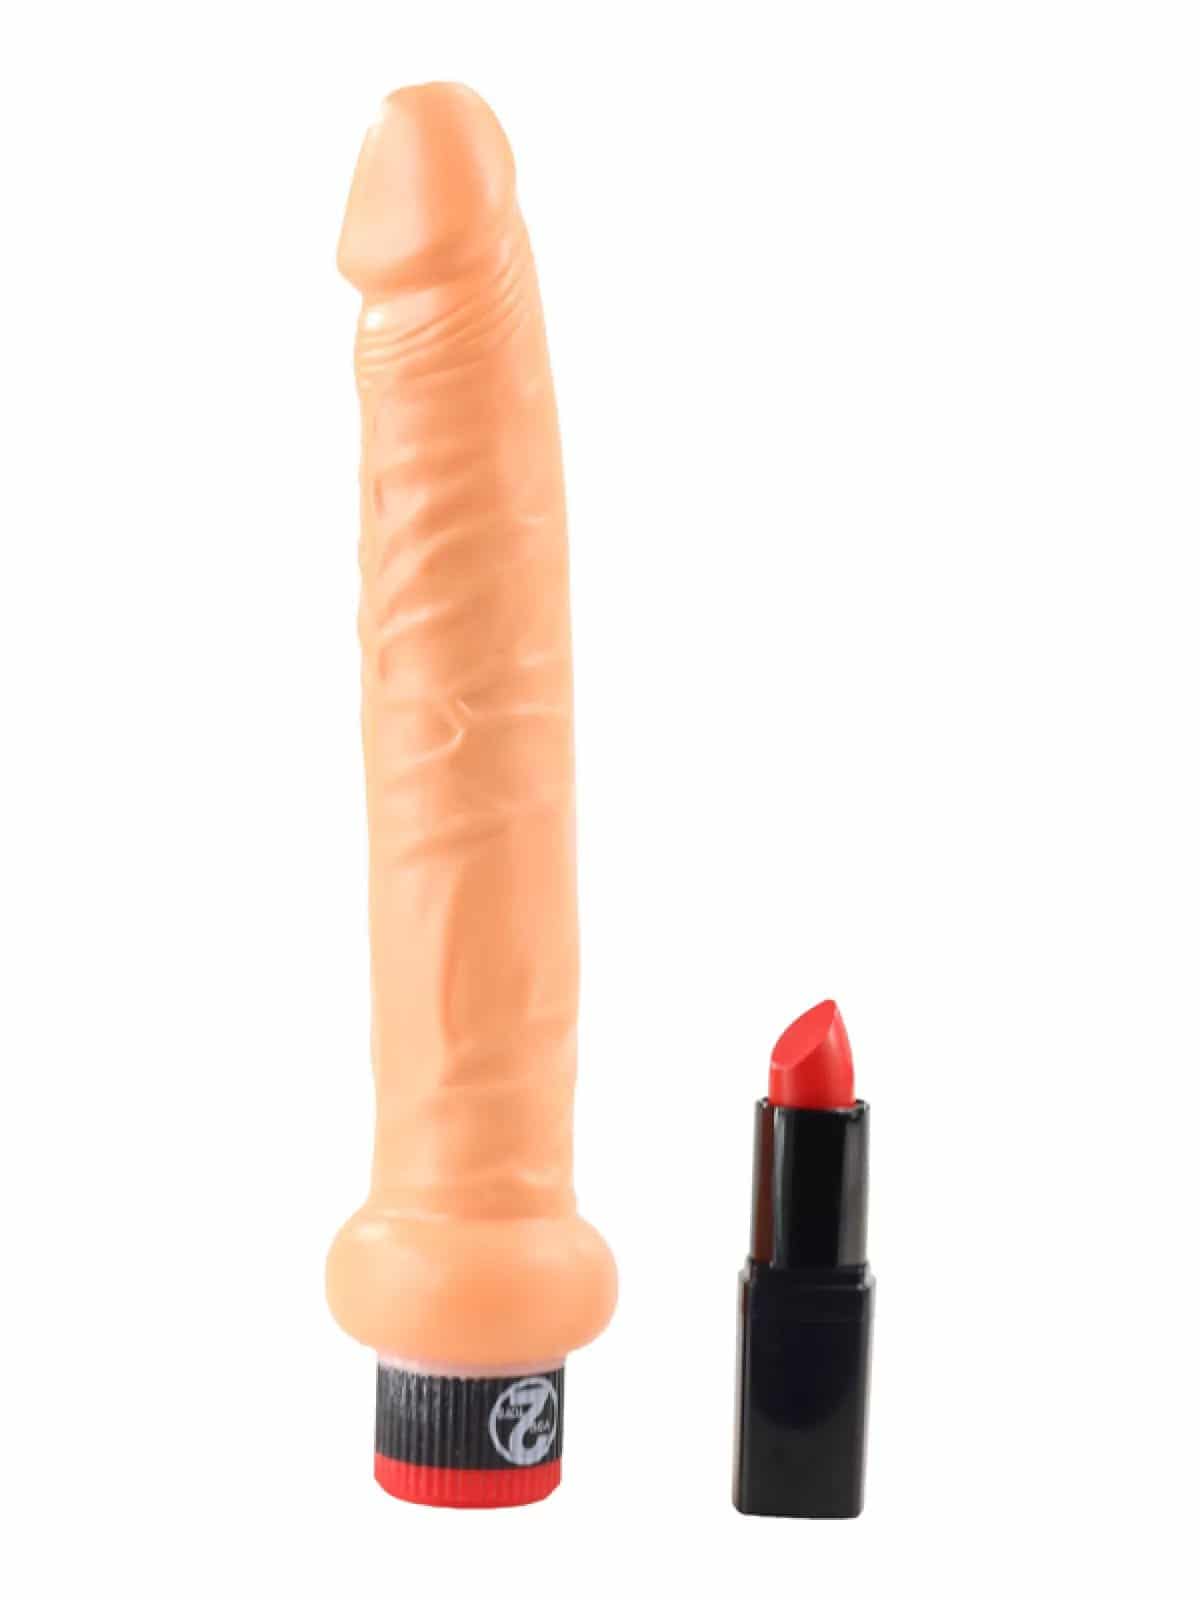 You2Toys Real Deal Anal Vibrator test